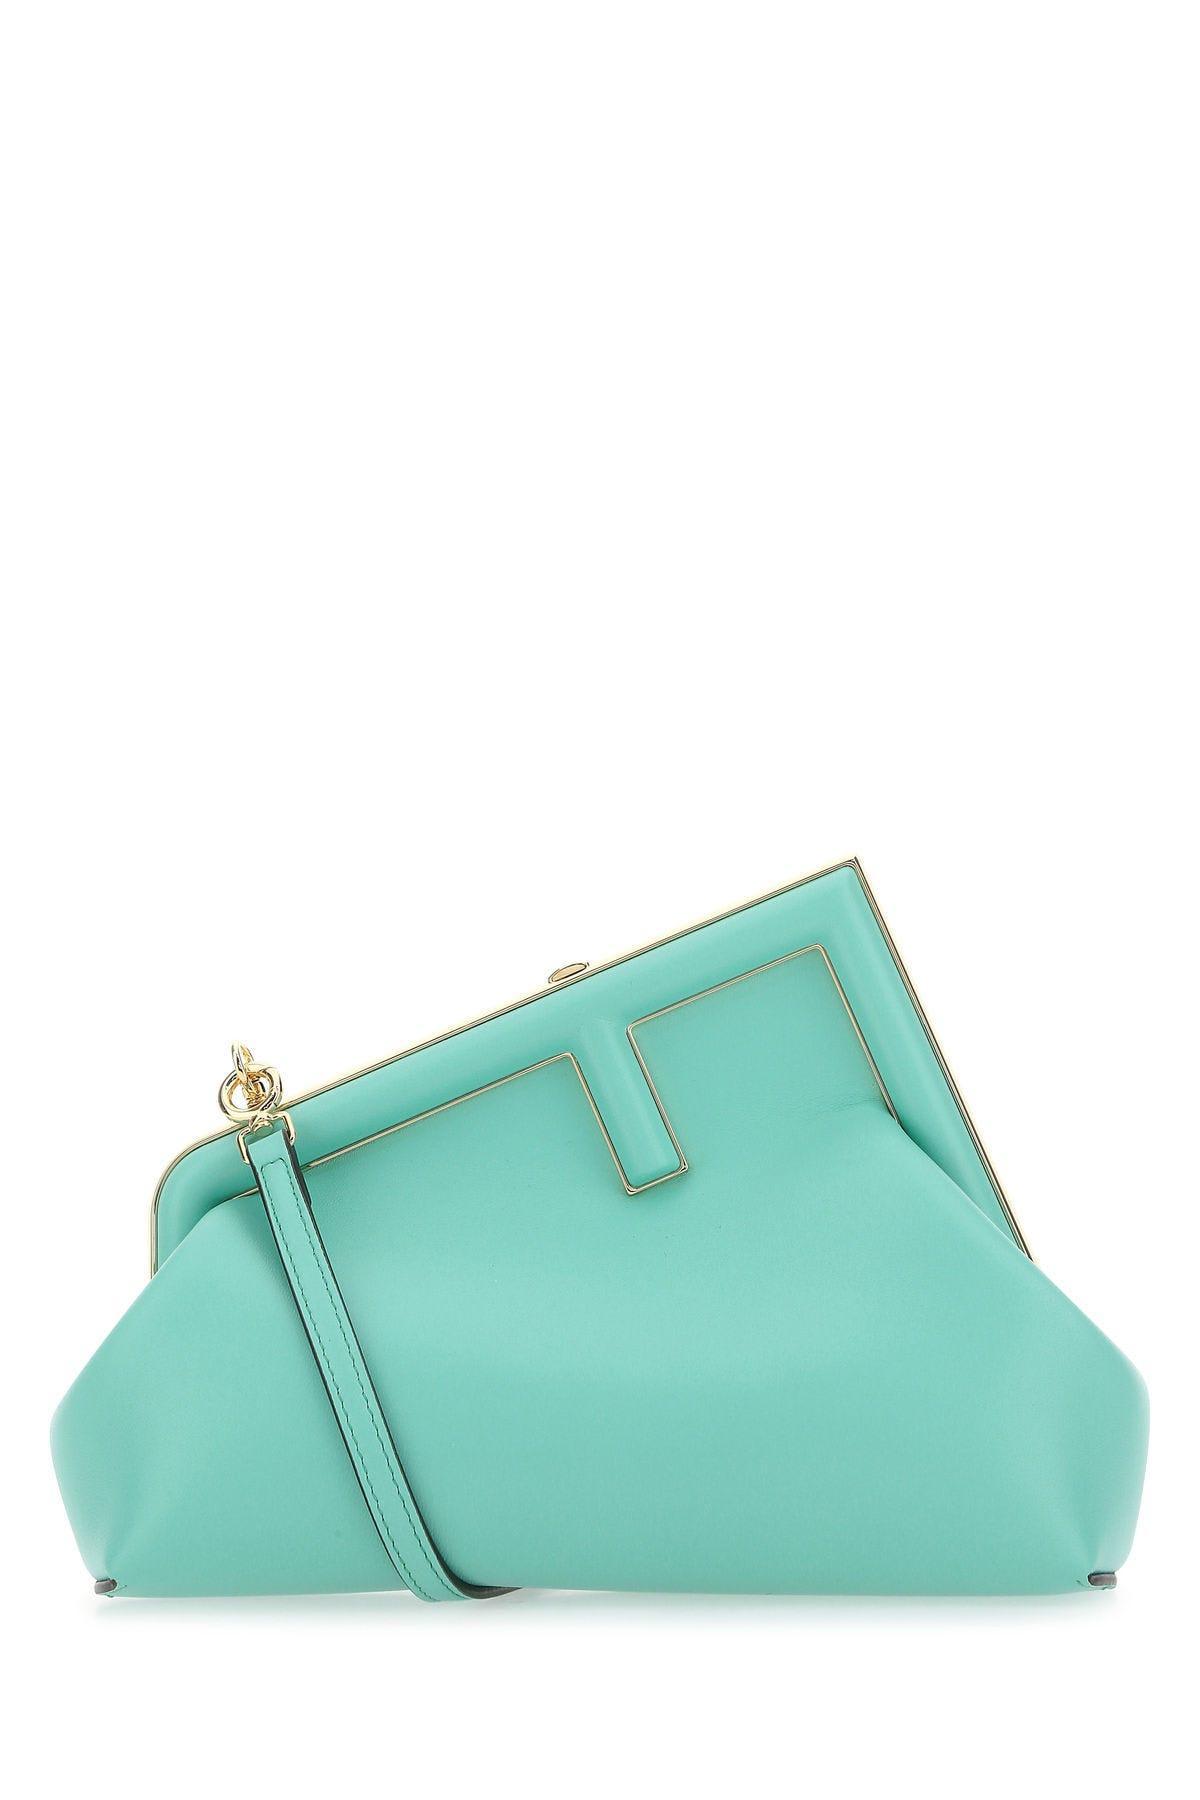 Fendi Light-blue Leather Small First Clutch in Green | Lyst